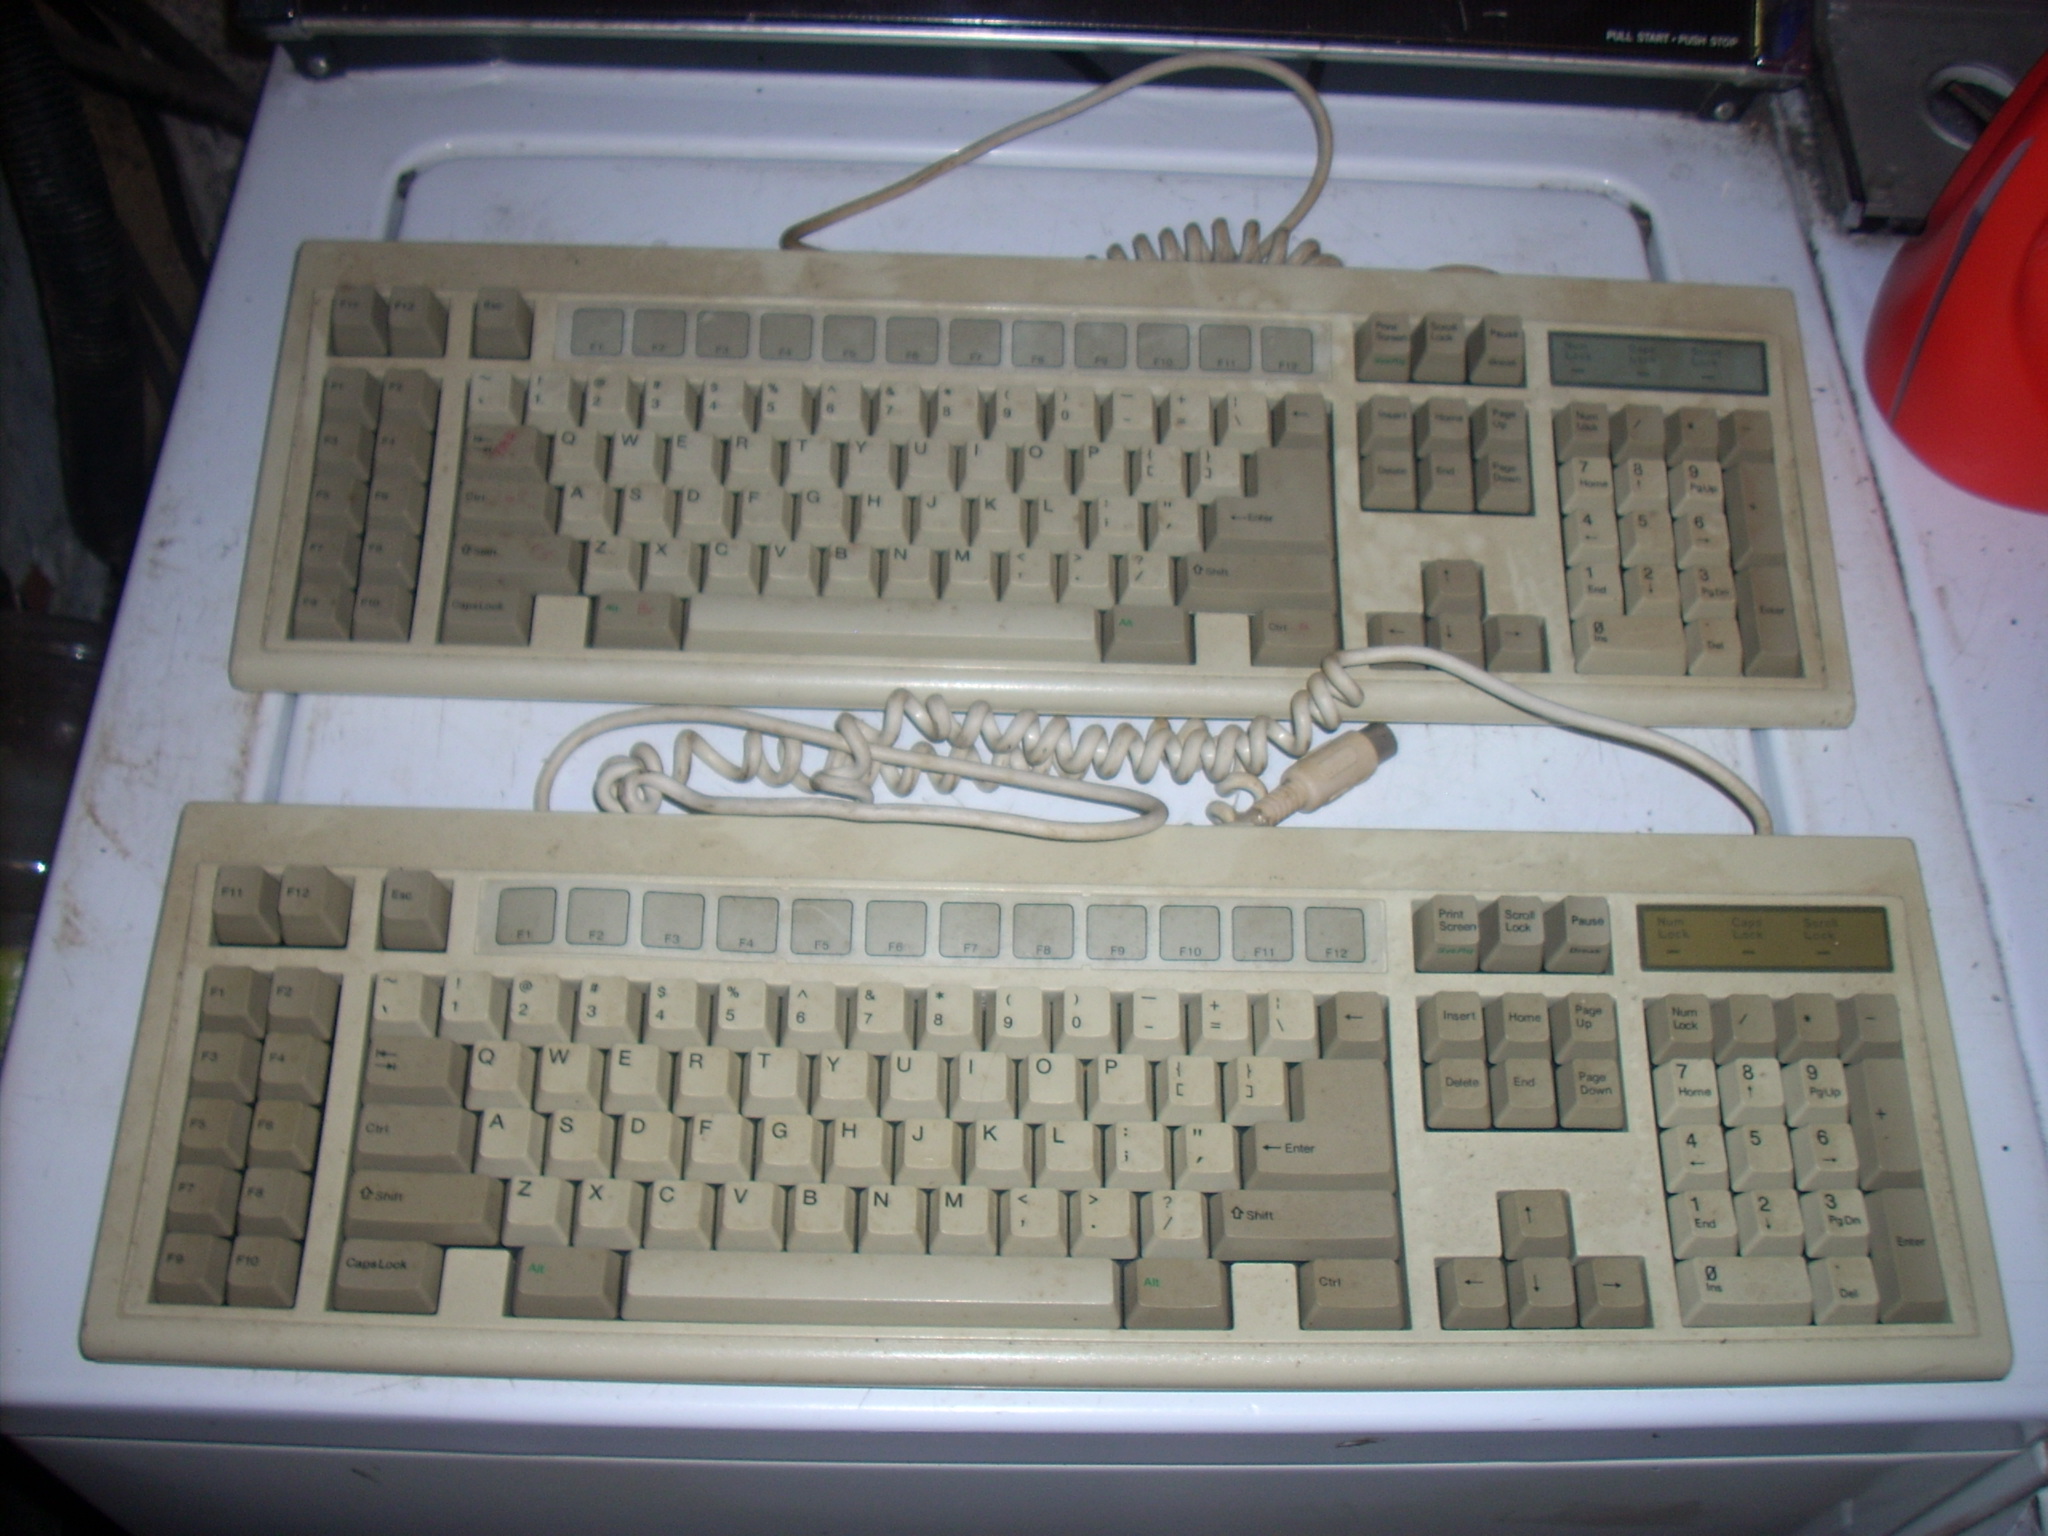 Saved two good ones out of dozens that were broken, usually the top row keys, which were very deep.